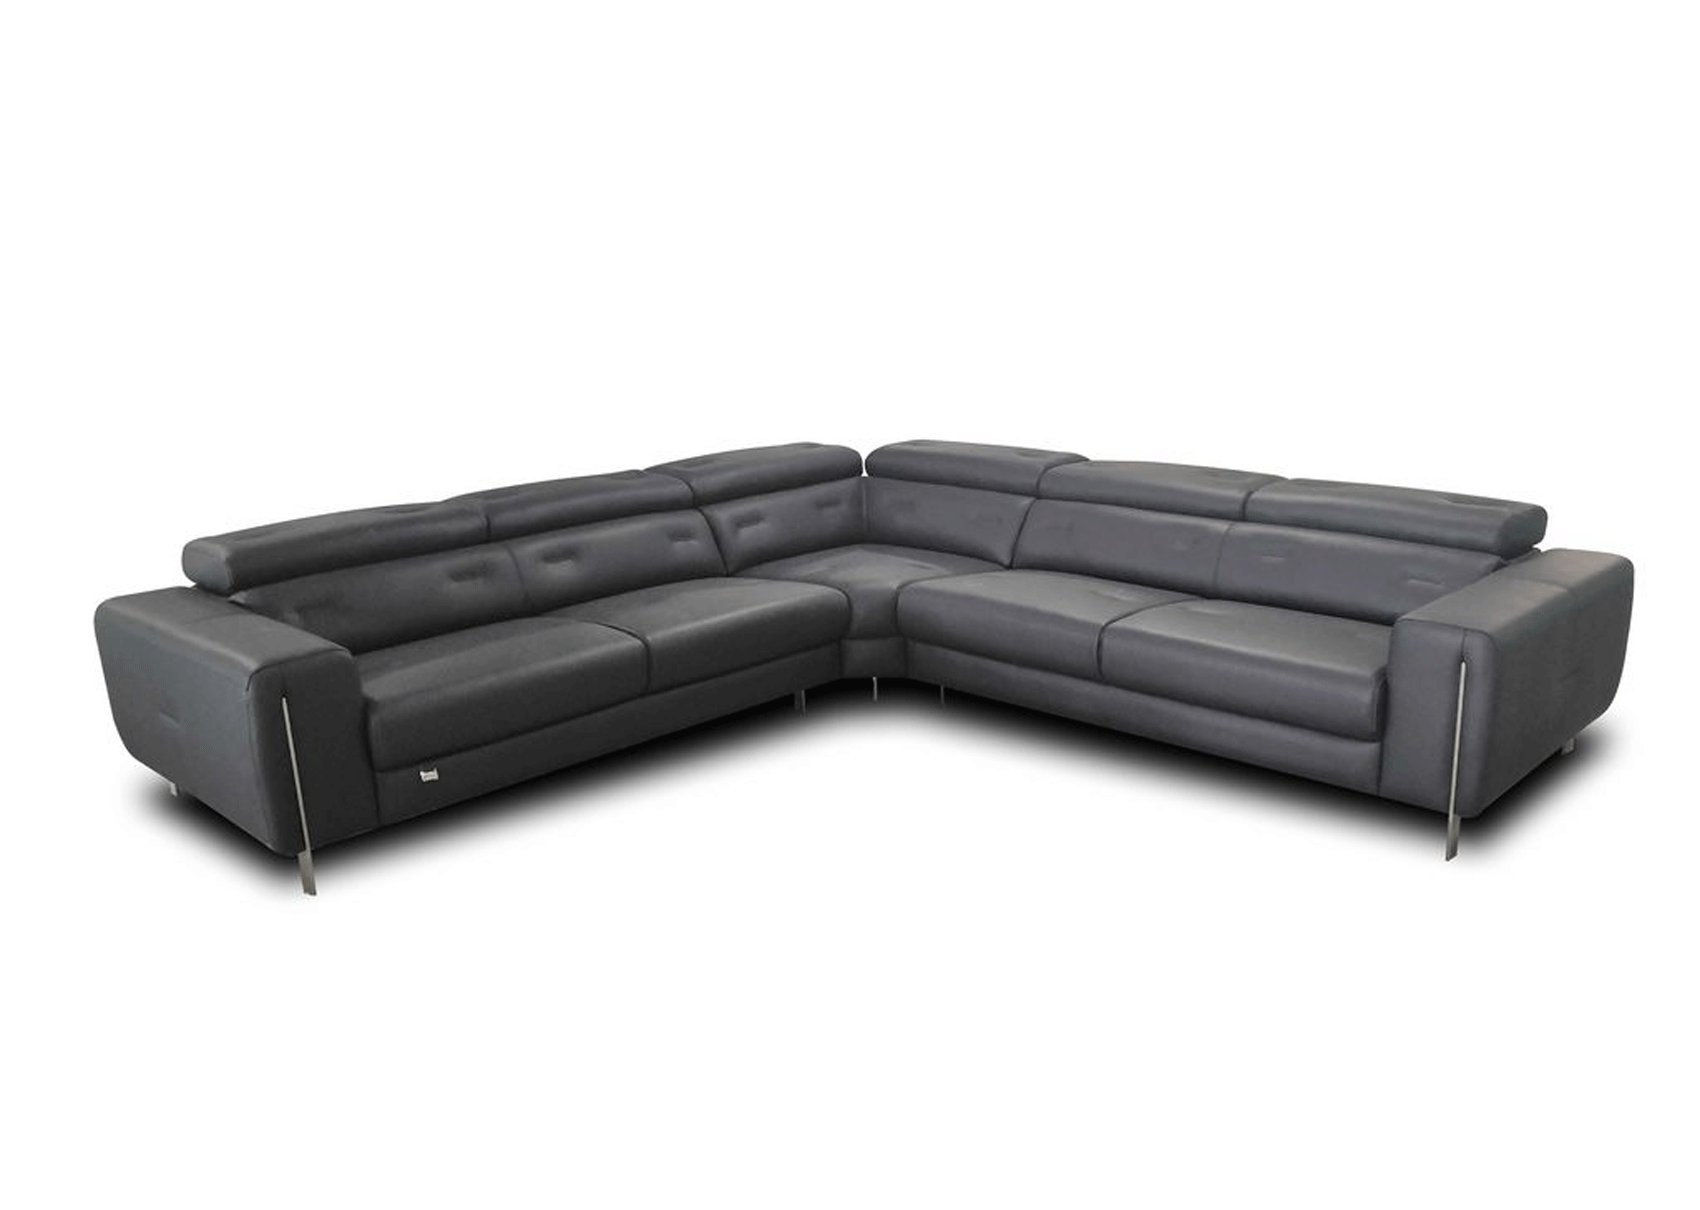 Living Room Furniture Sleepers Sofas Loveseats and Chairs 795 Sectional